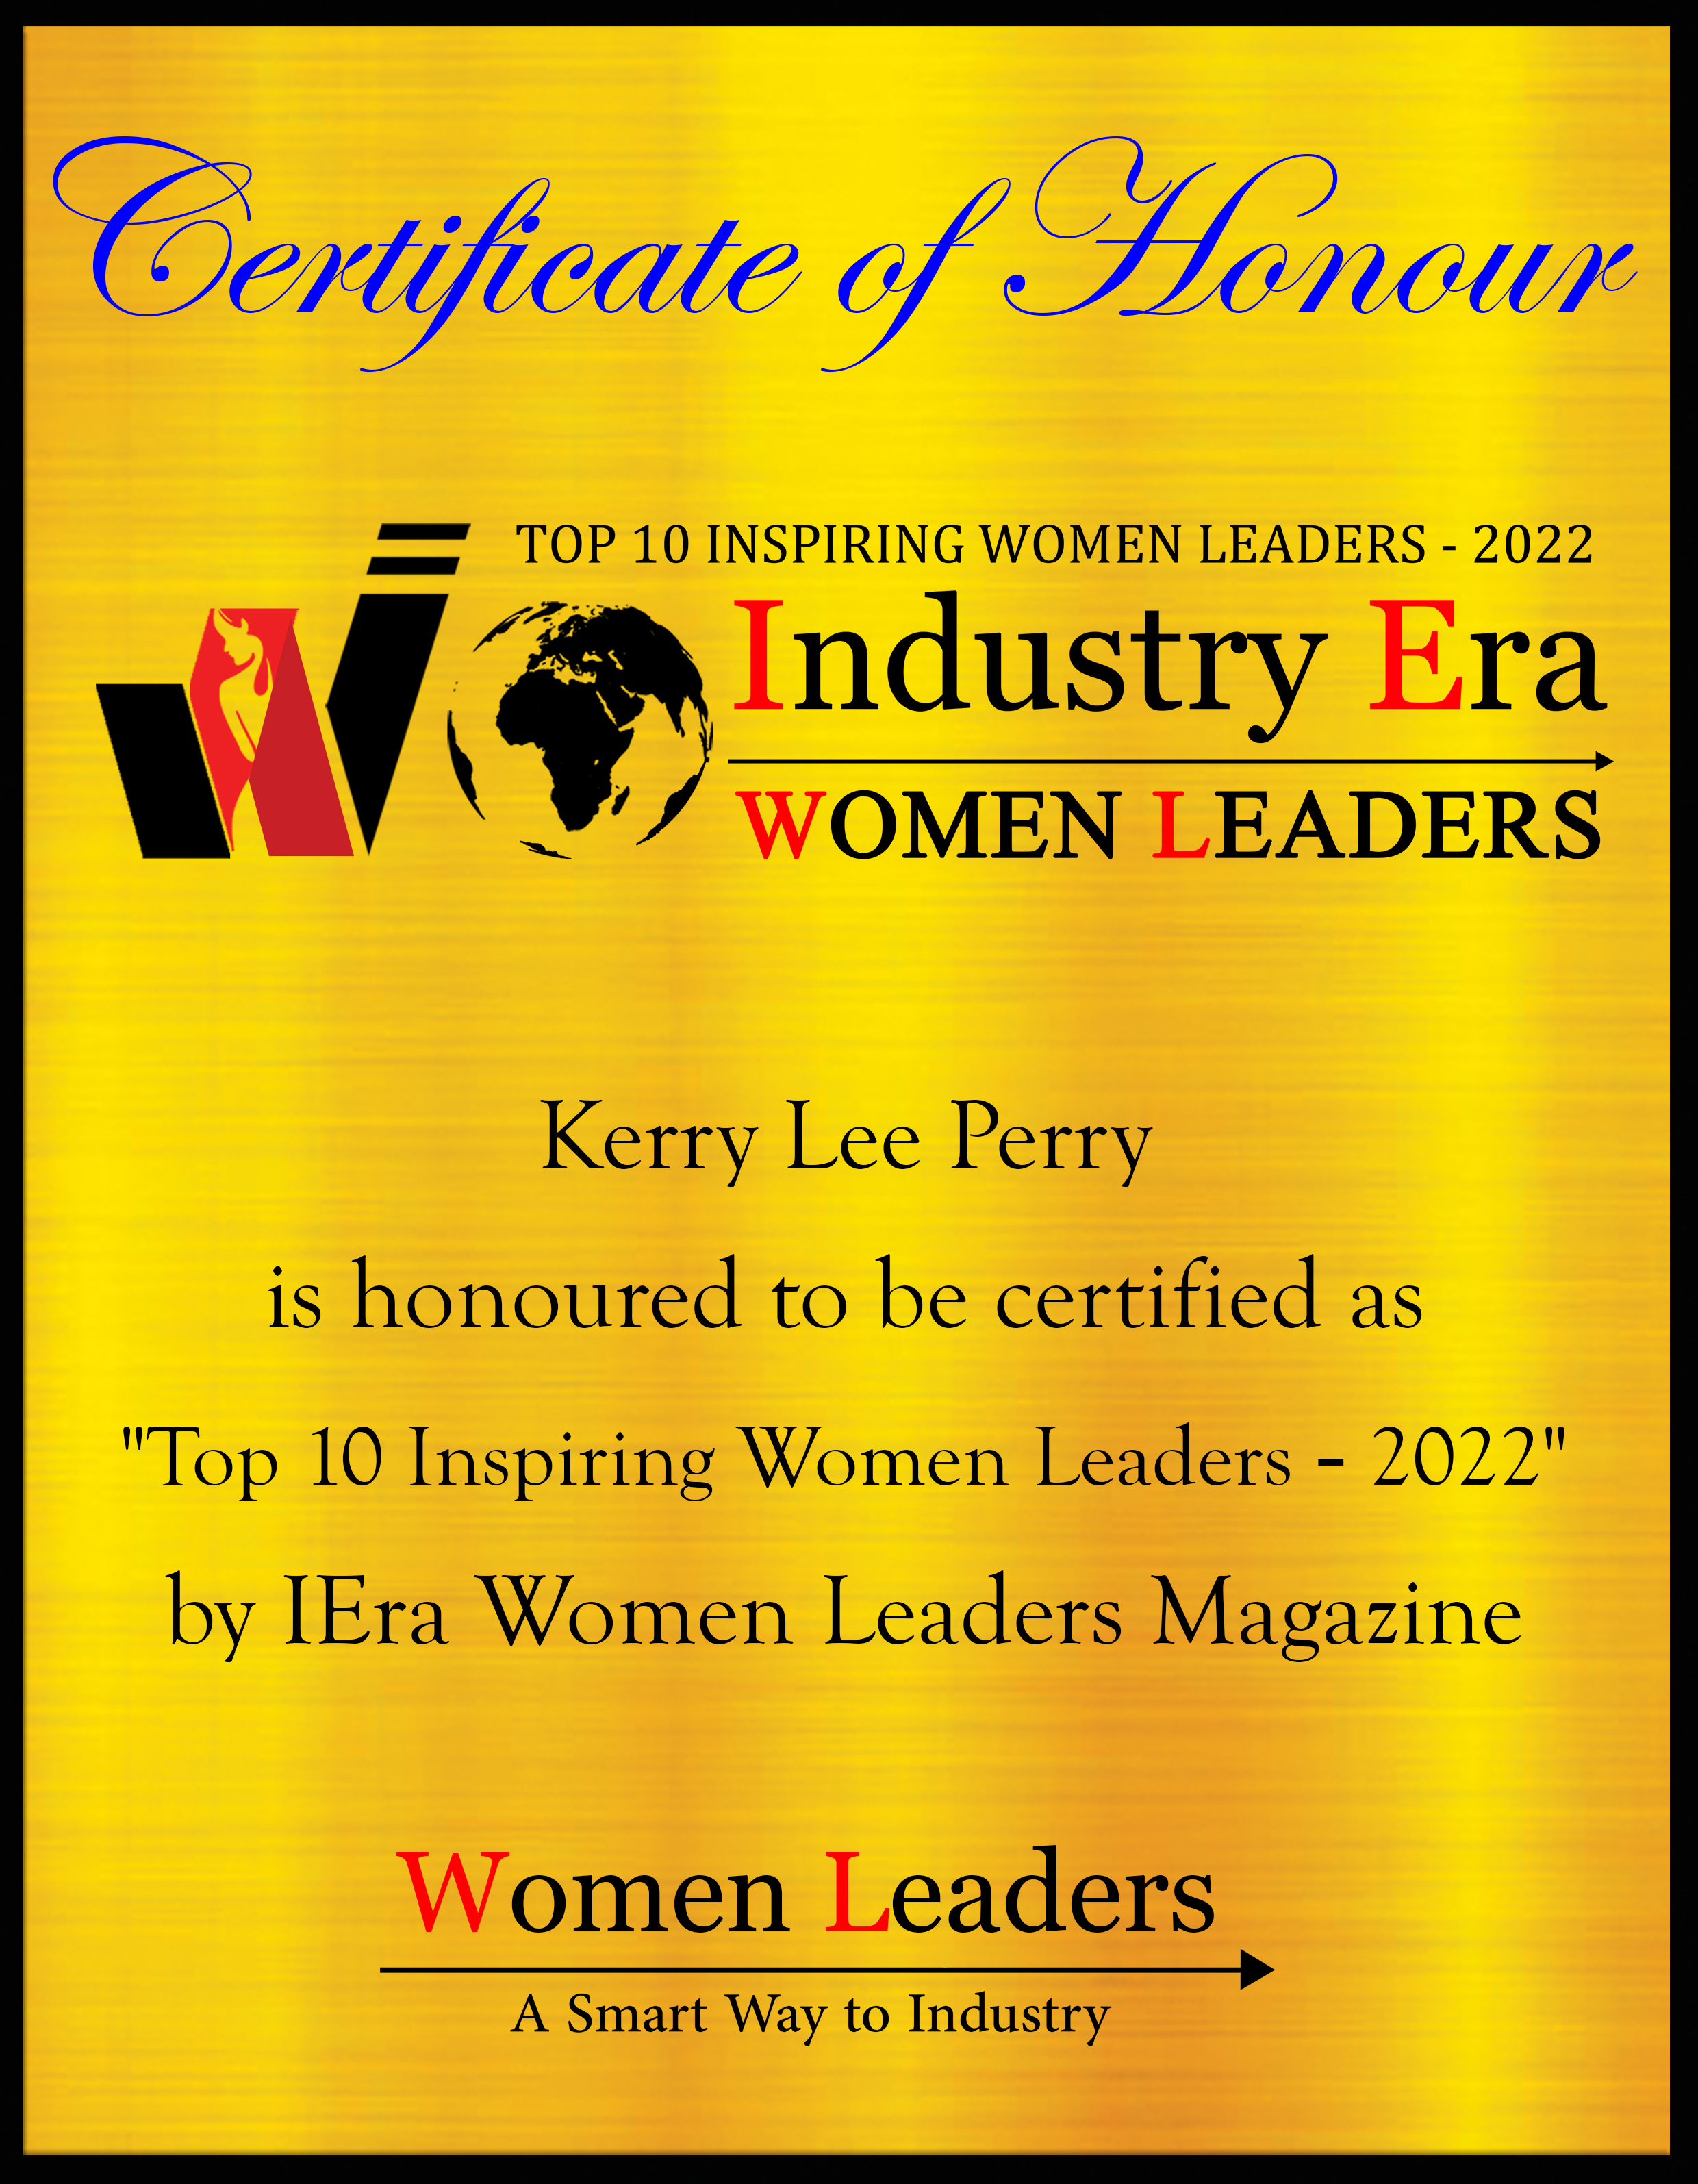 Kerry Lee Perry, Chief Marketing Officer of IPG, Top 10 Inspiring Women Leaders of 2022